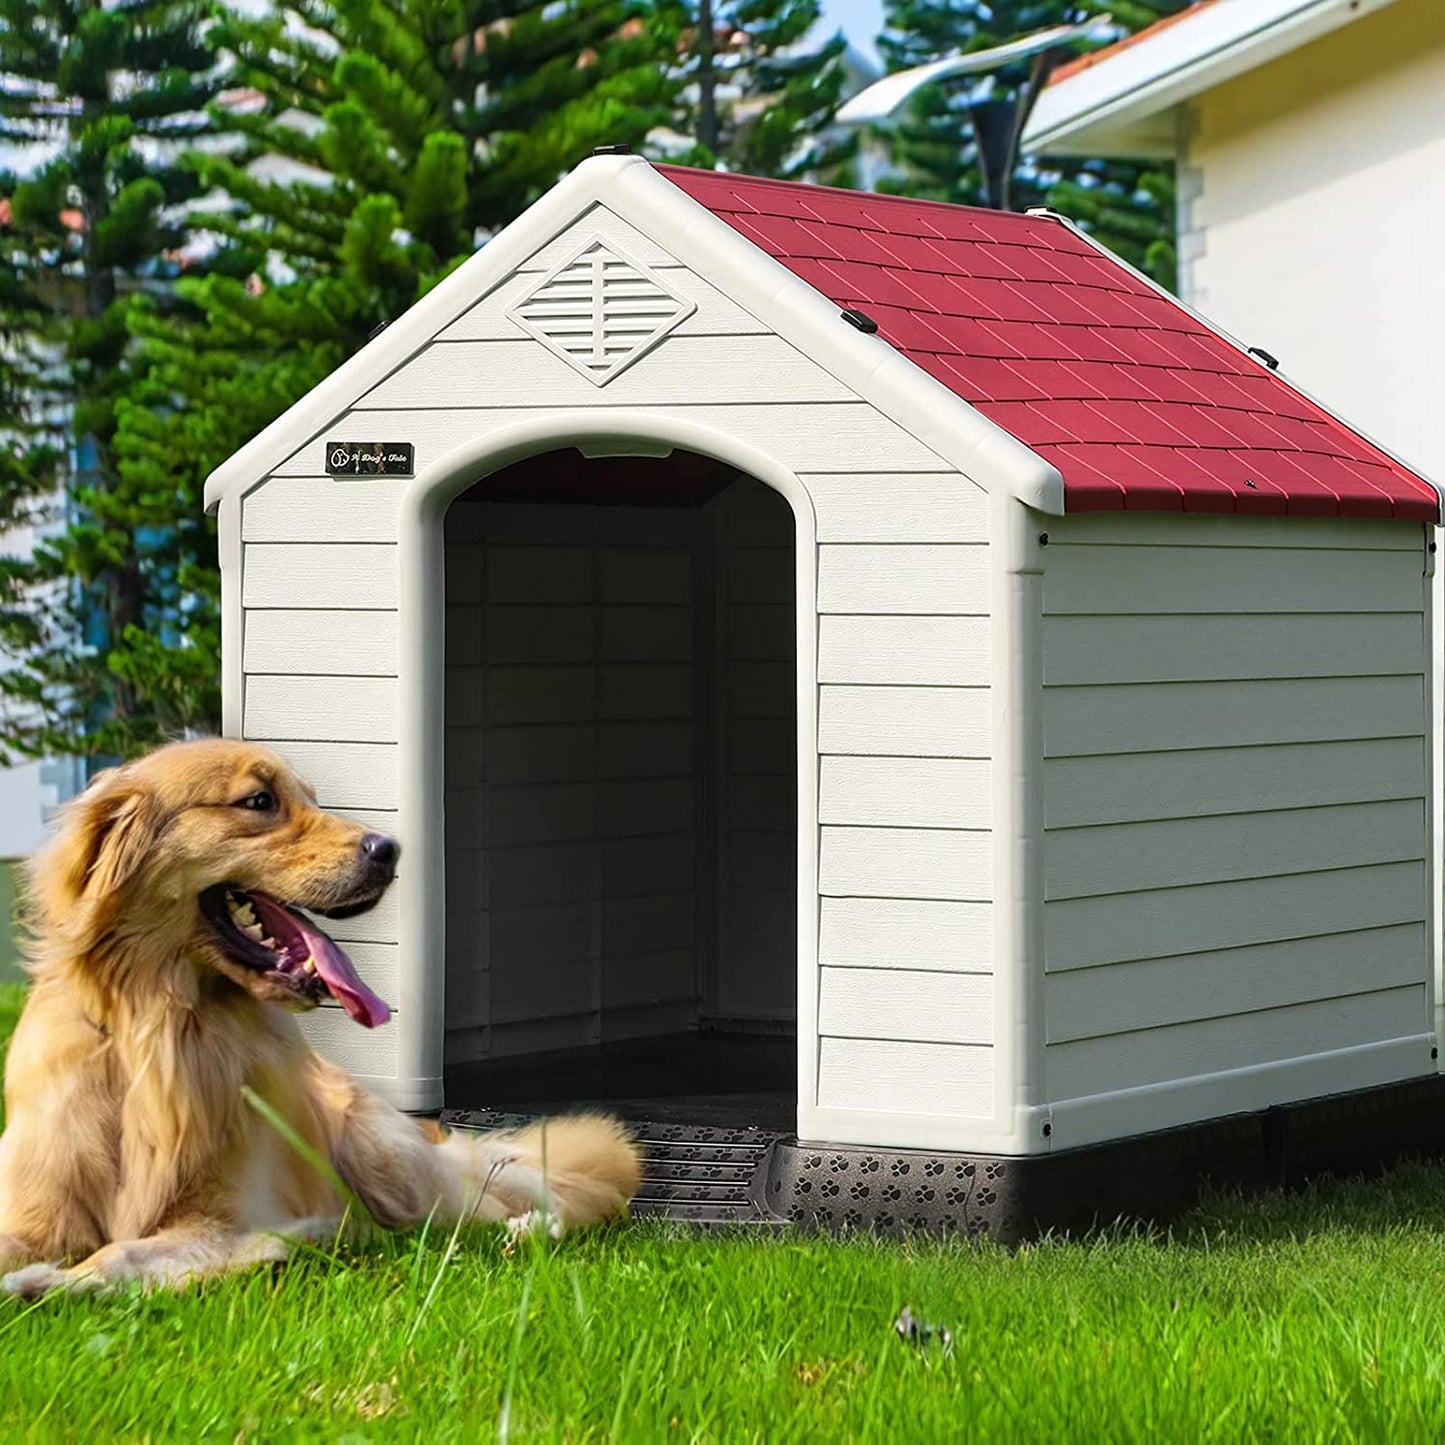 Waleaf Plastic Dog House Outdoor Indoor for Small Medium Larige Dogs,Waterproof Dog Houses with Elevated Floor and Air Vents,Durable Ventilate & Easy Clean and Assemble